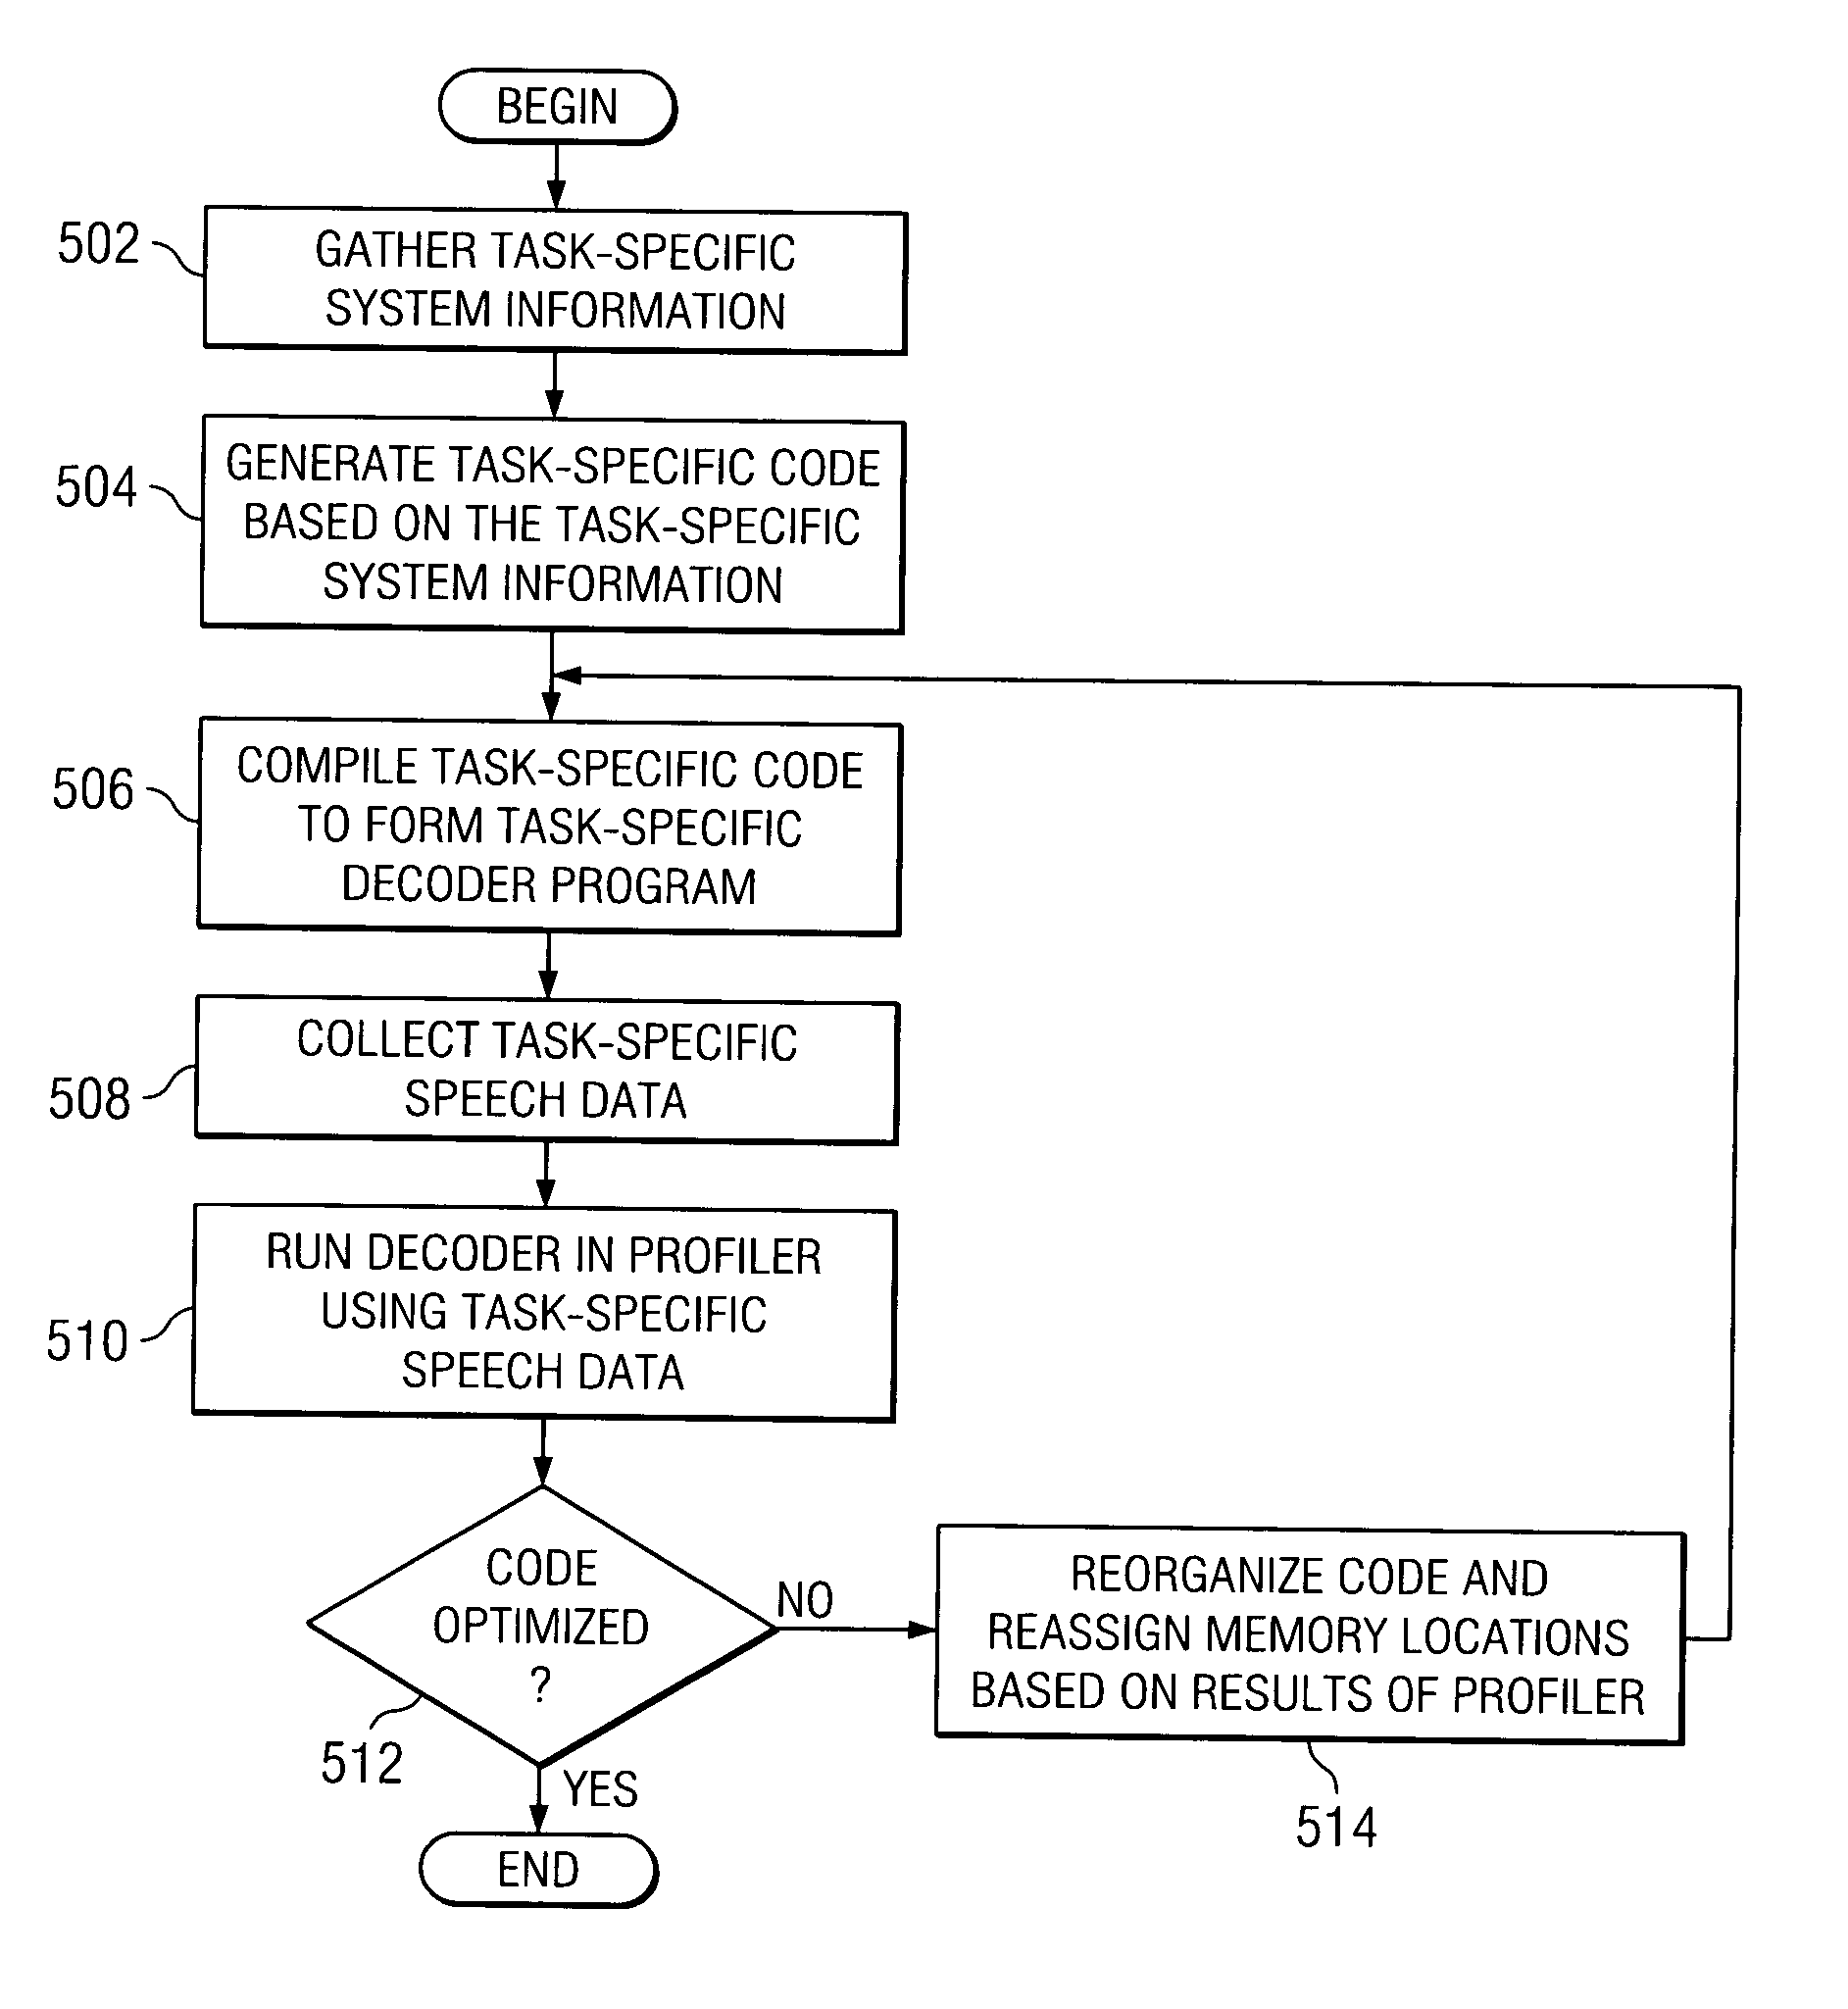 Task specific code generation for speech recognition decoding